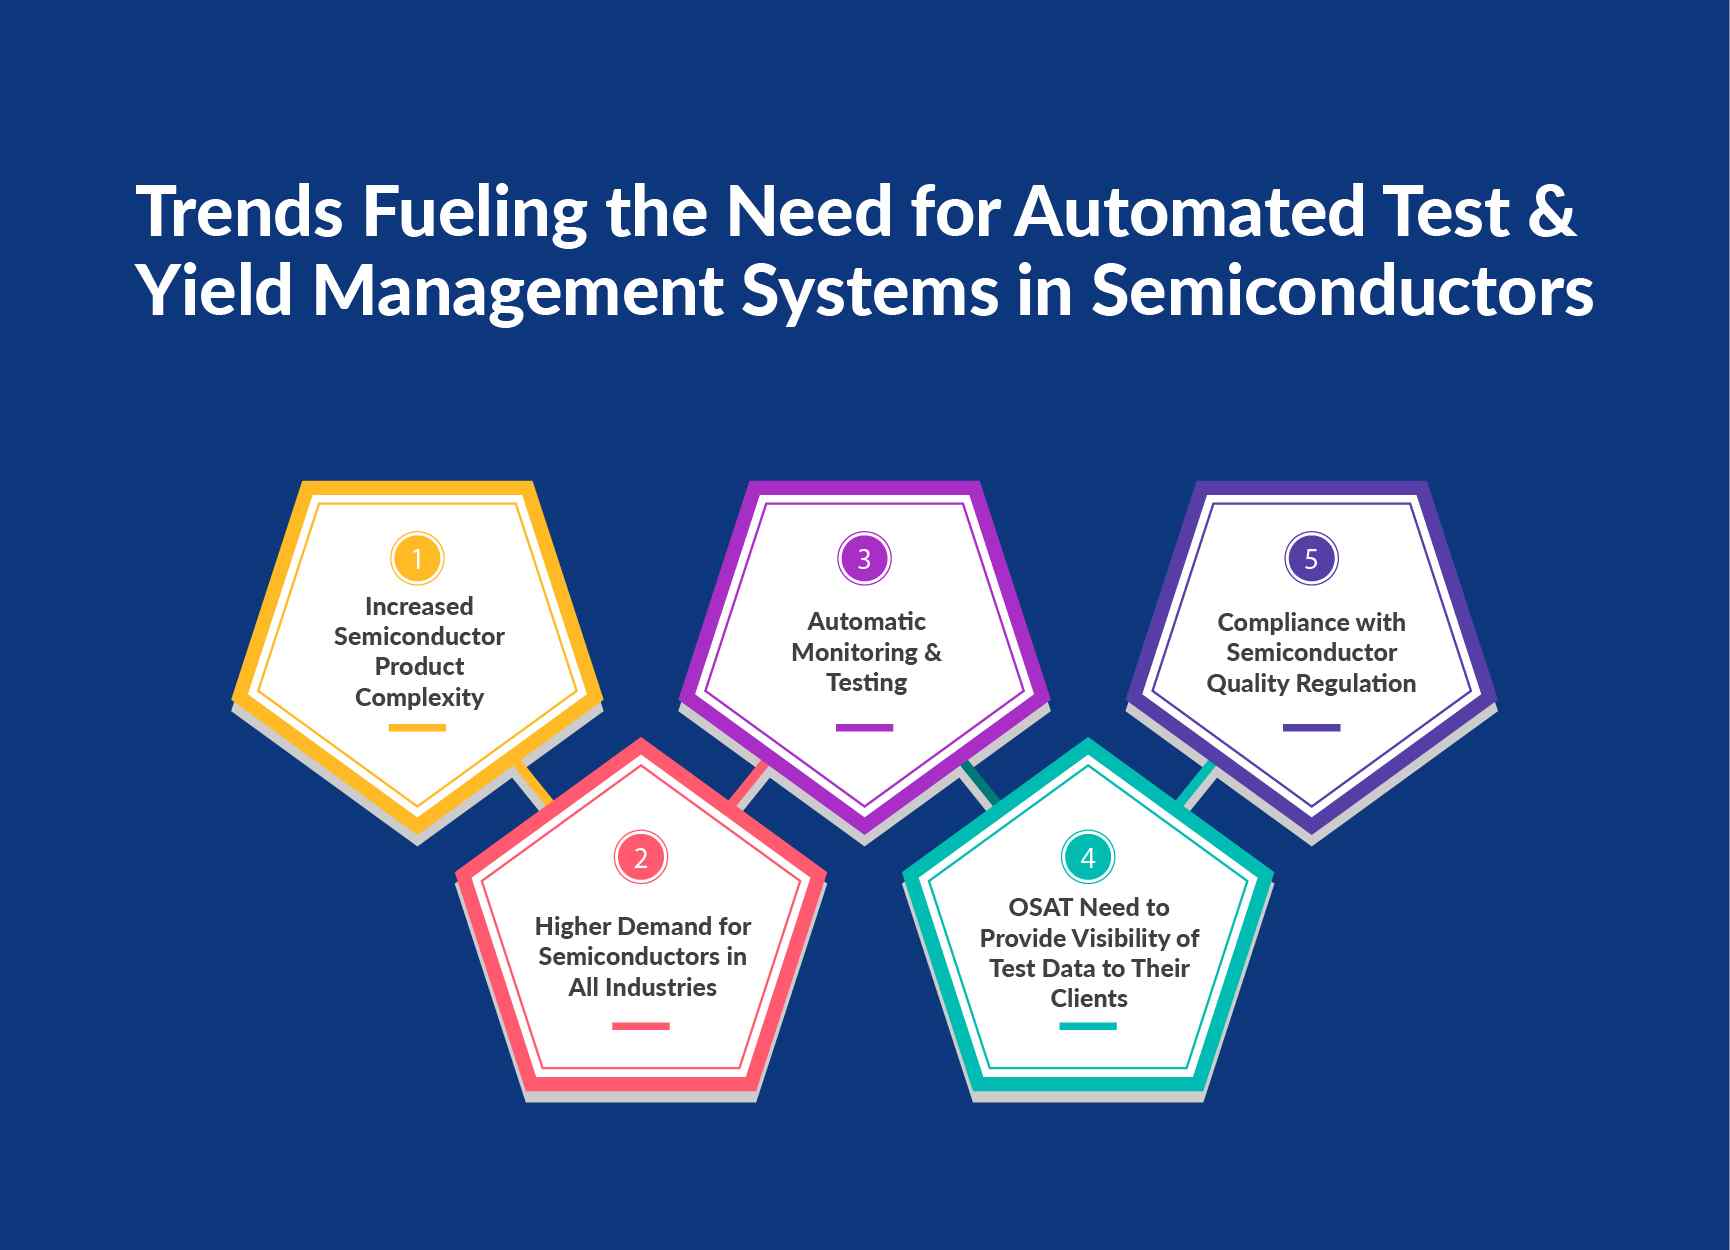 Tools for Automated Testing and Yield Management